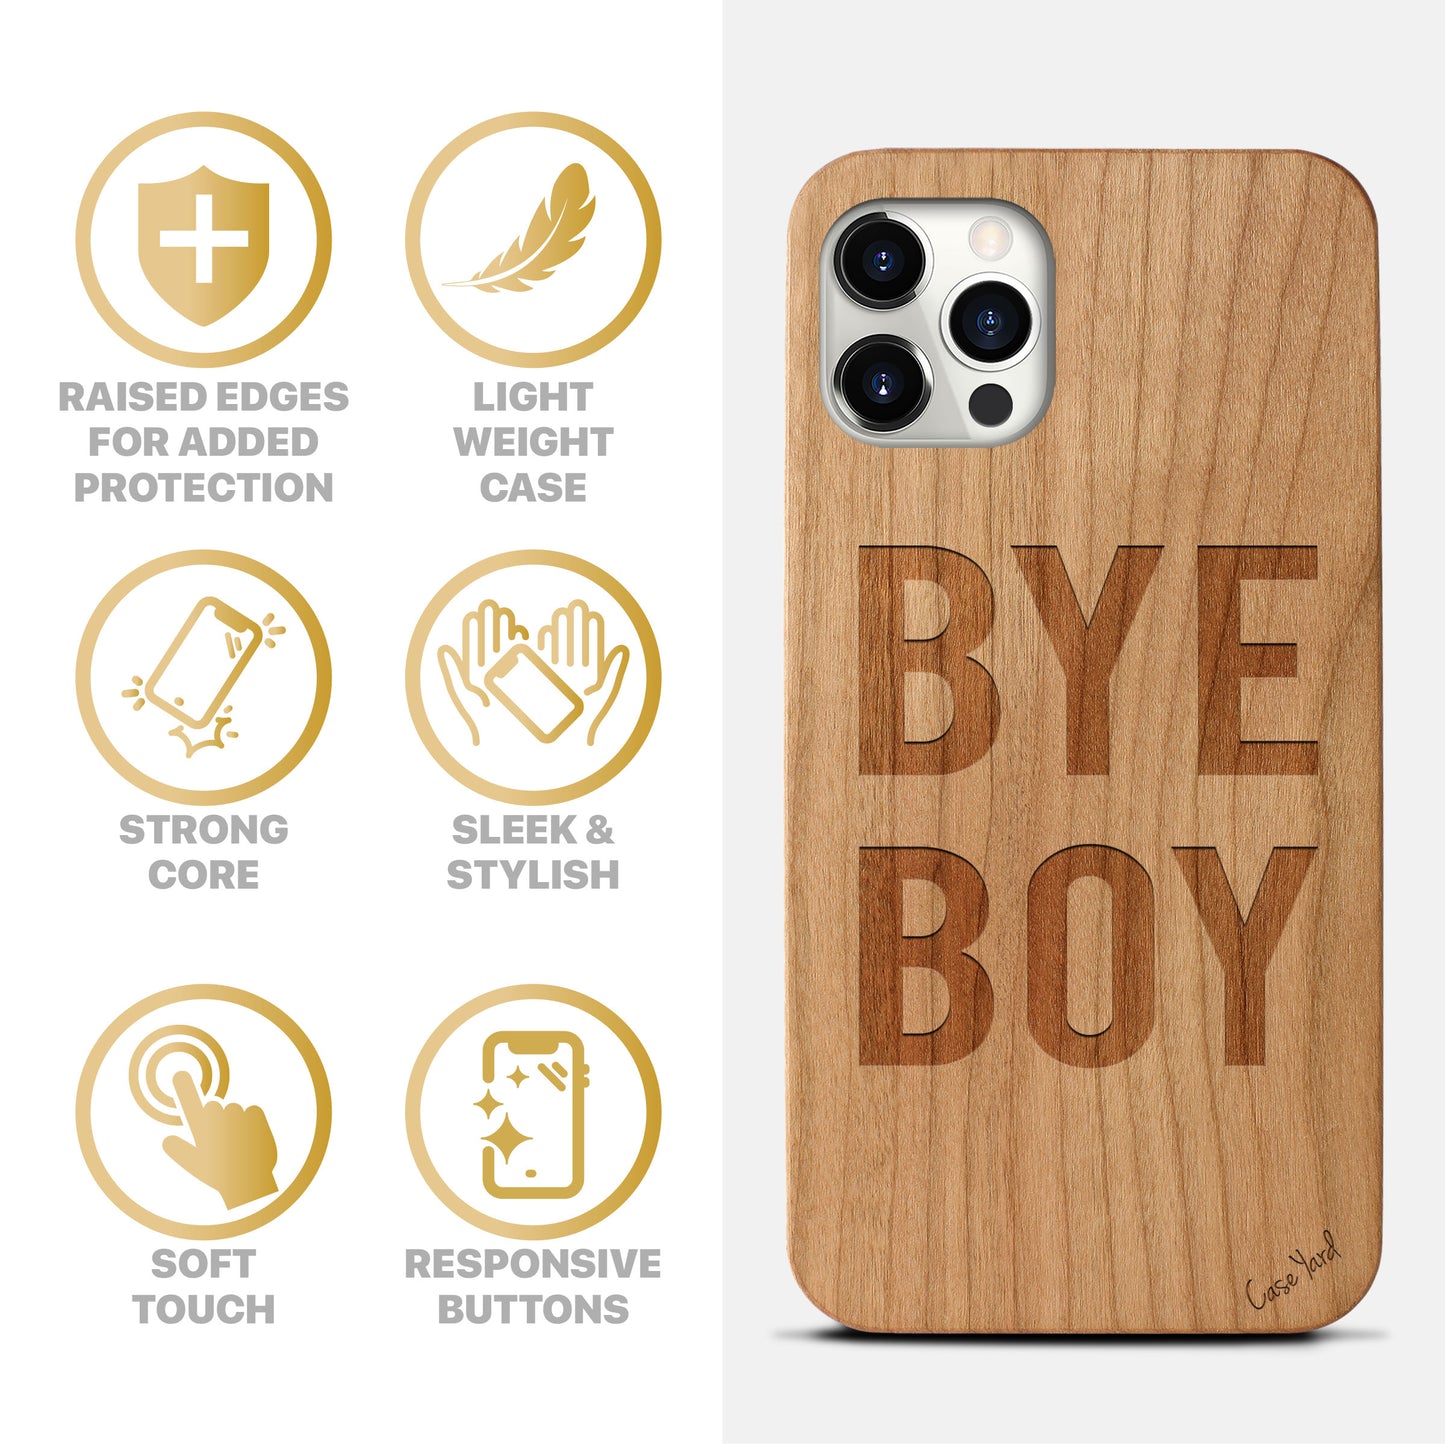 Wooden Cell Phone Case Cover, Laser Engraved case for iPhone & Samsung phone Bye Boy Design